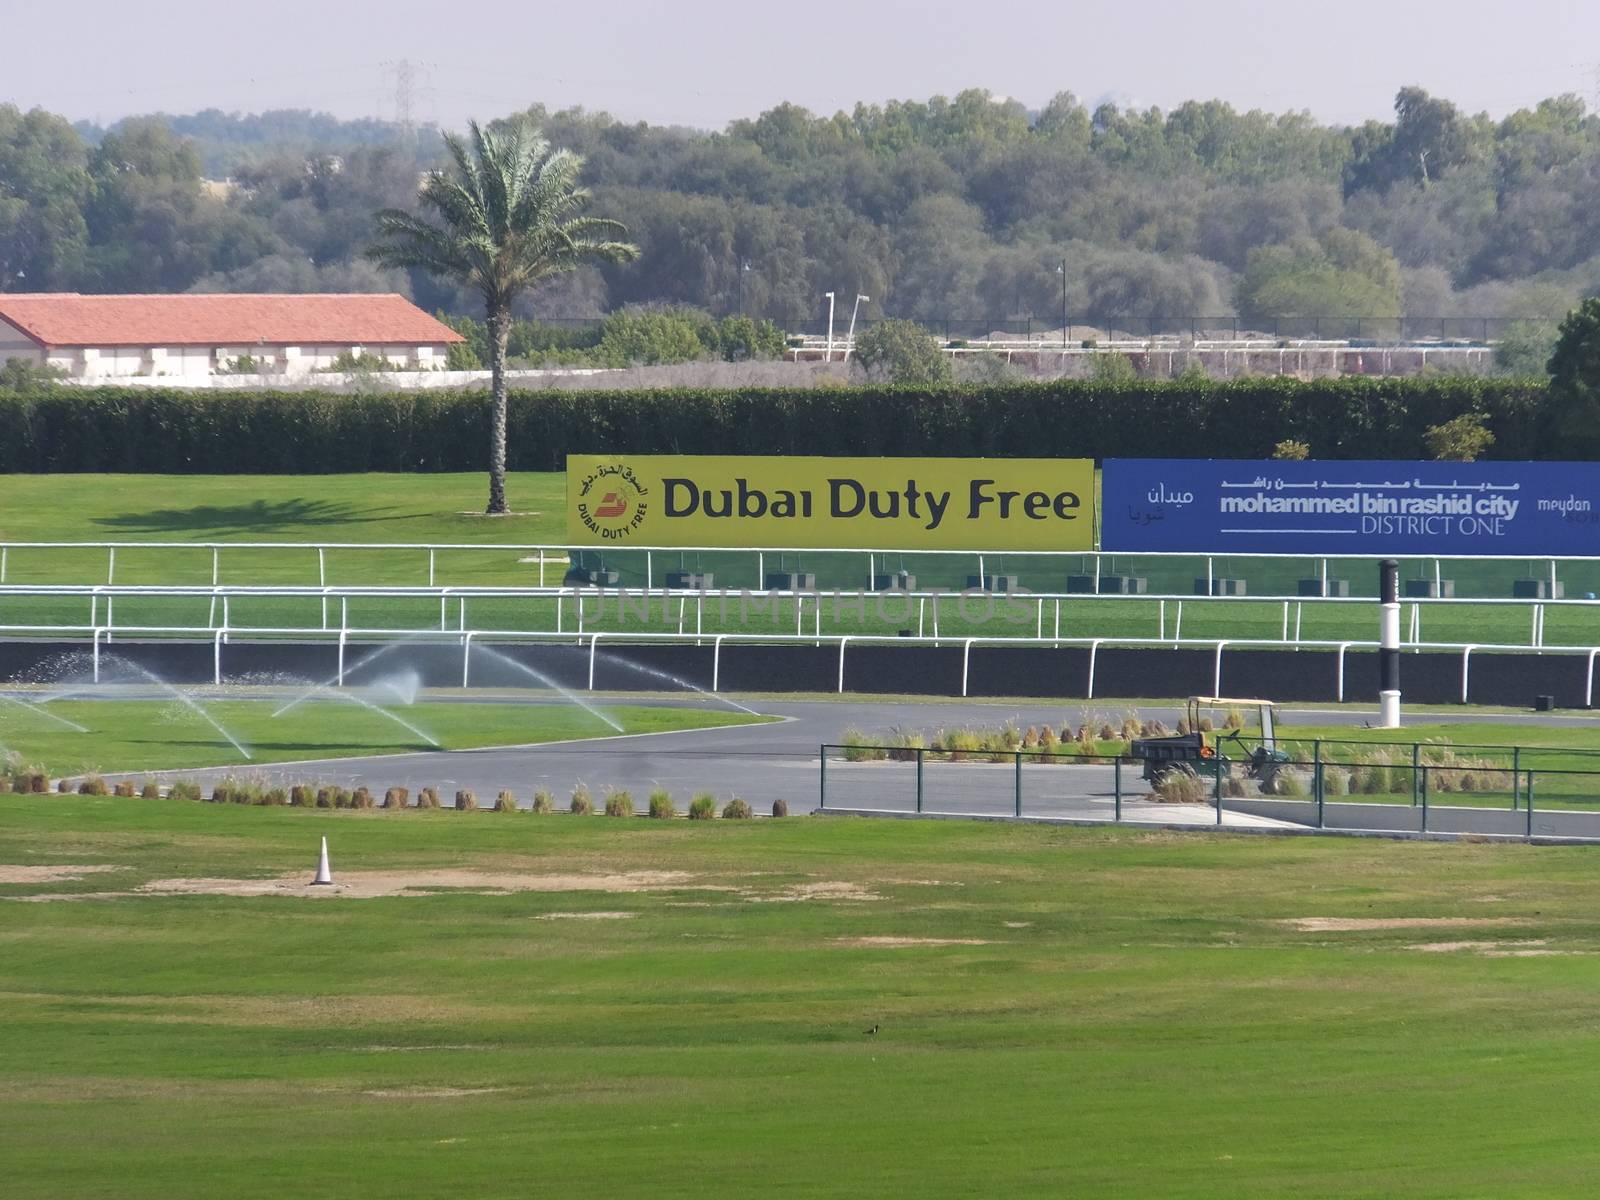 Meydan Racecourse in Dubai, UAE.  The Dubai World Cup, the world's richest race day with over US$26.25 million in prize money, is held here.